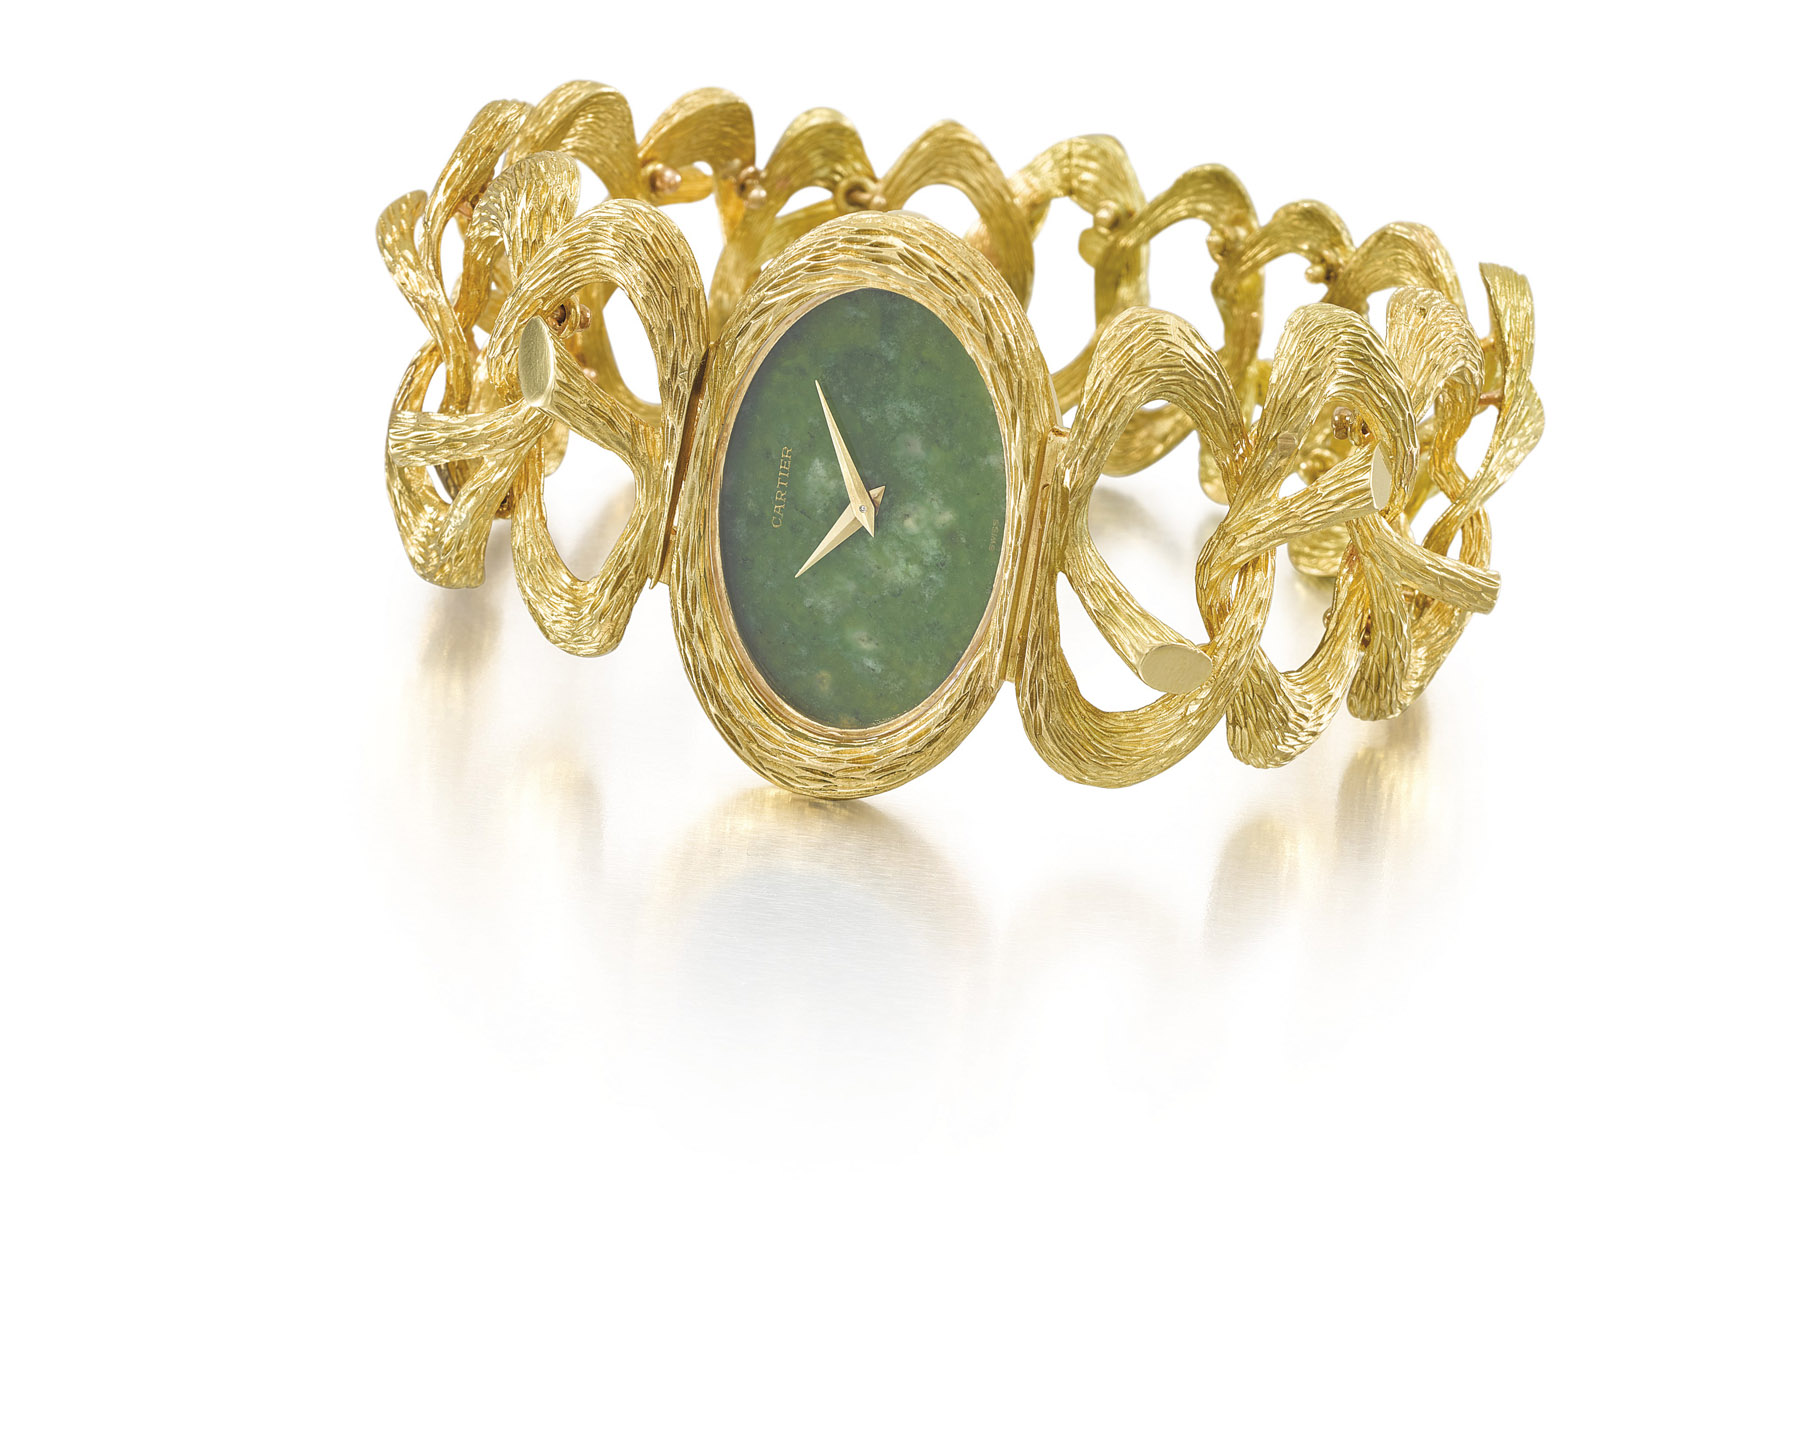 Piaget. A fine and very elegant lady’s 18K gold and jade bracelet watch, retailed by Cartier, made in 1969 Estimate CHF 25,000 – 35,000